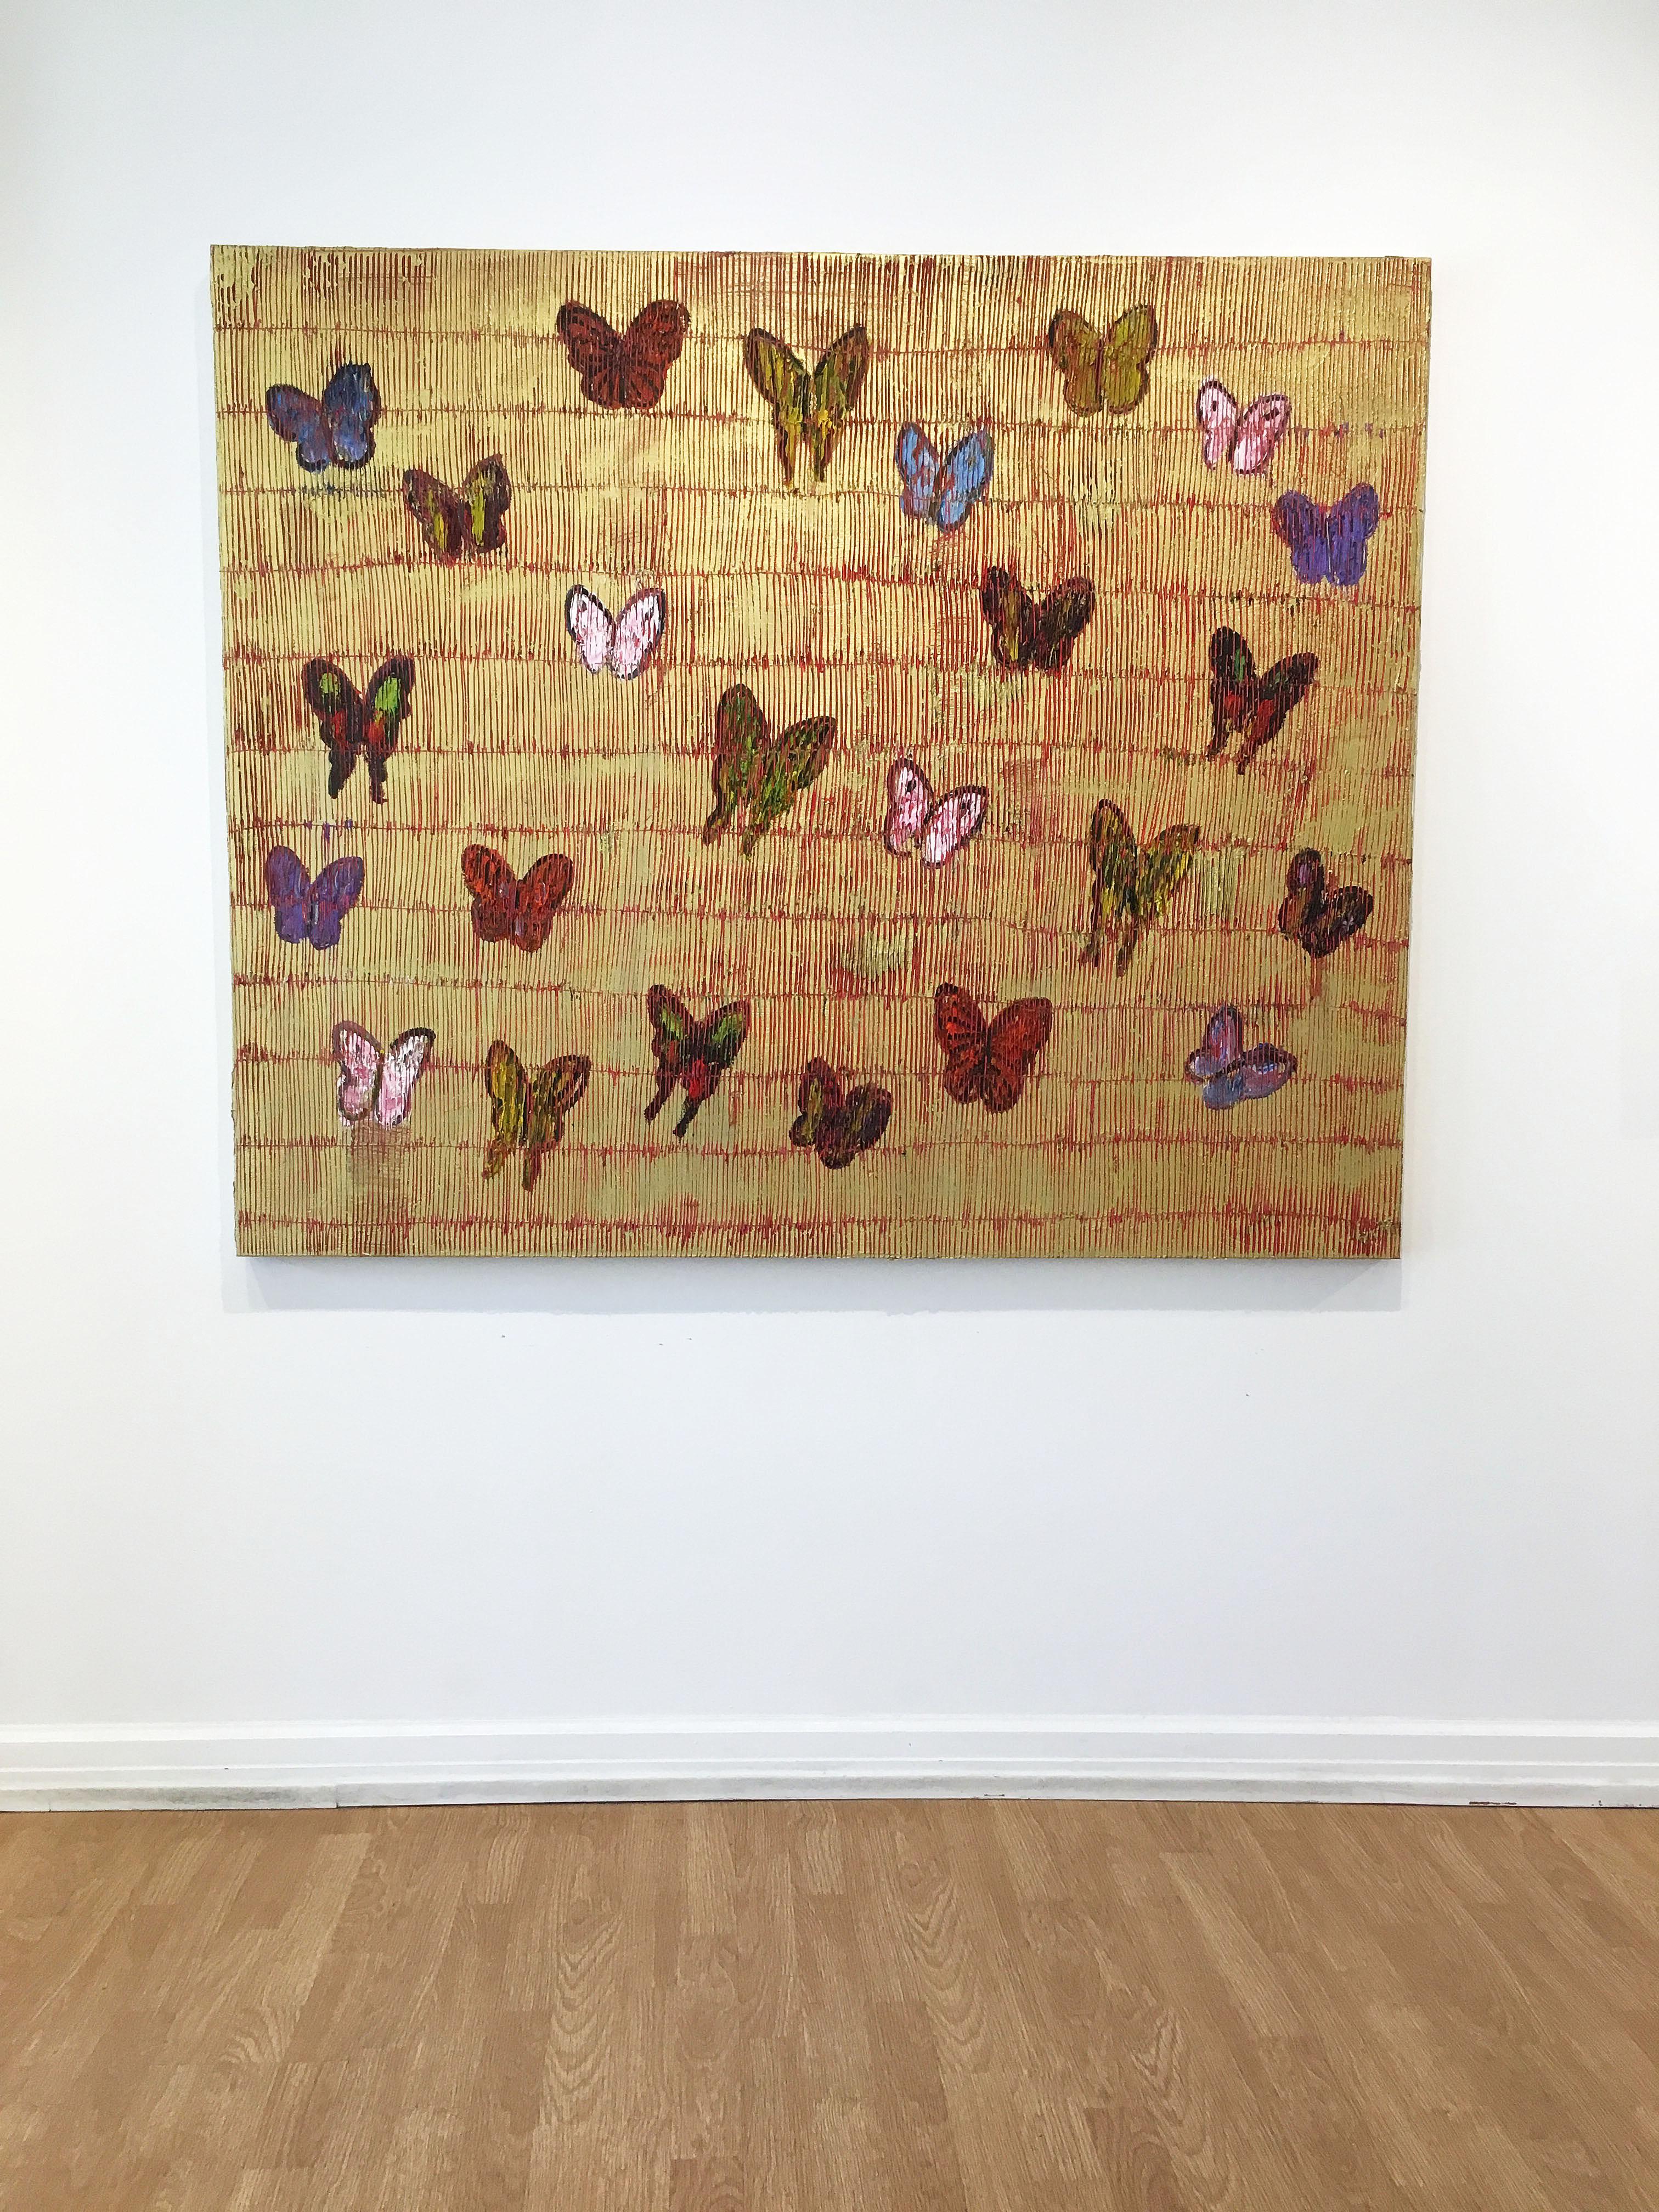 Hunt Slonem butterflies painting 'Red Parting' 2